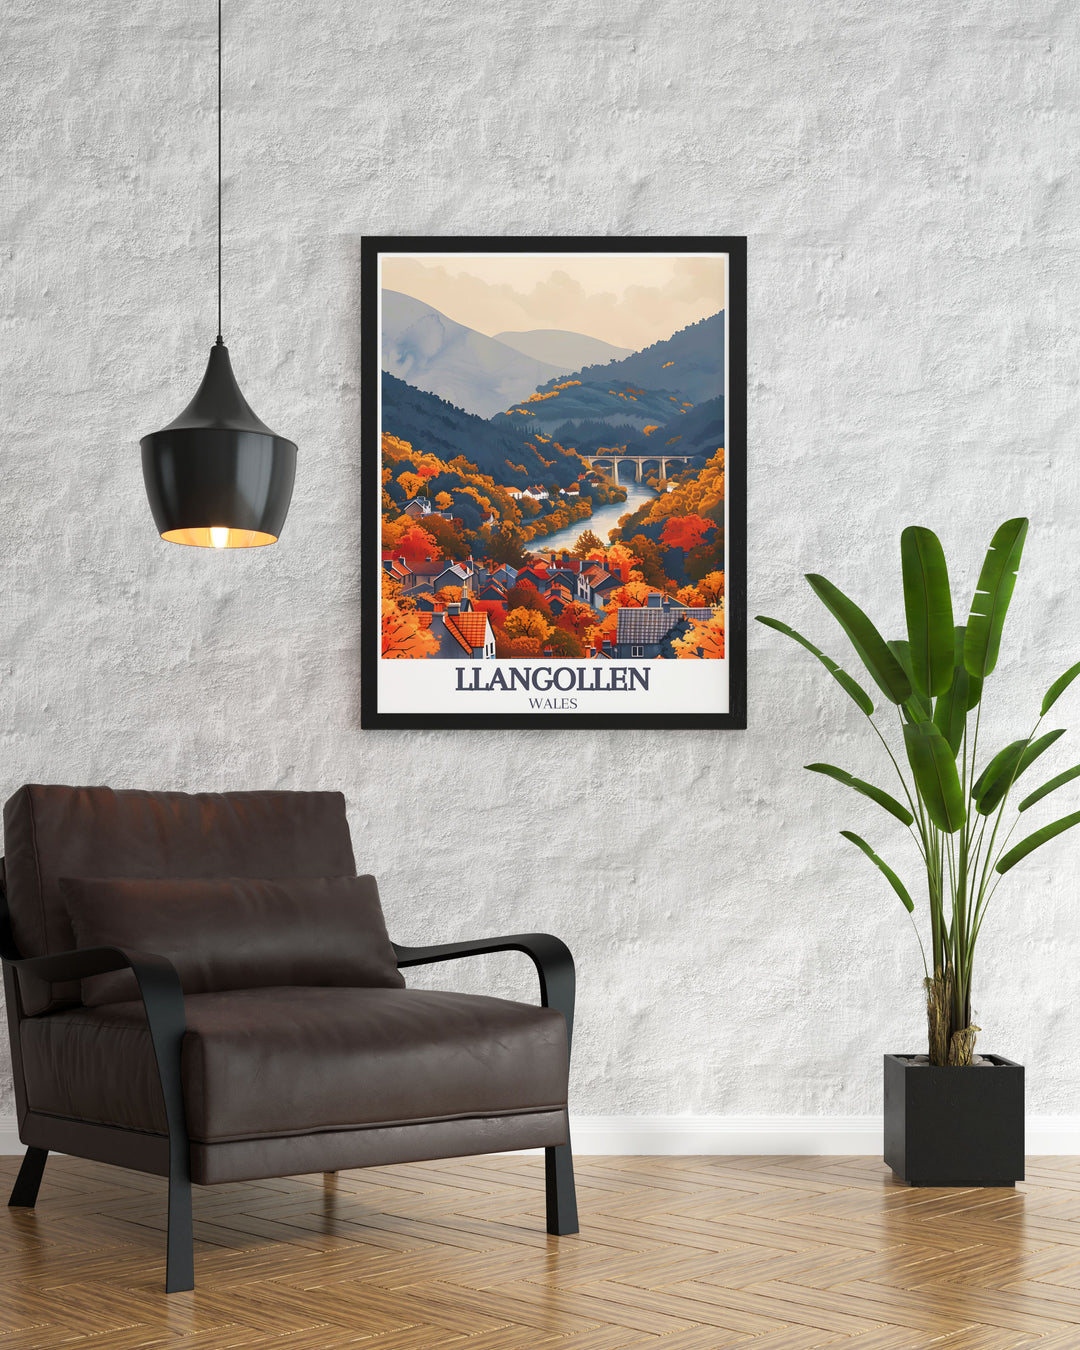 Celebrate Wales heritage with this wall art print of River Dee and Pontcysyllte Aqueduct, adding charm to any room.